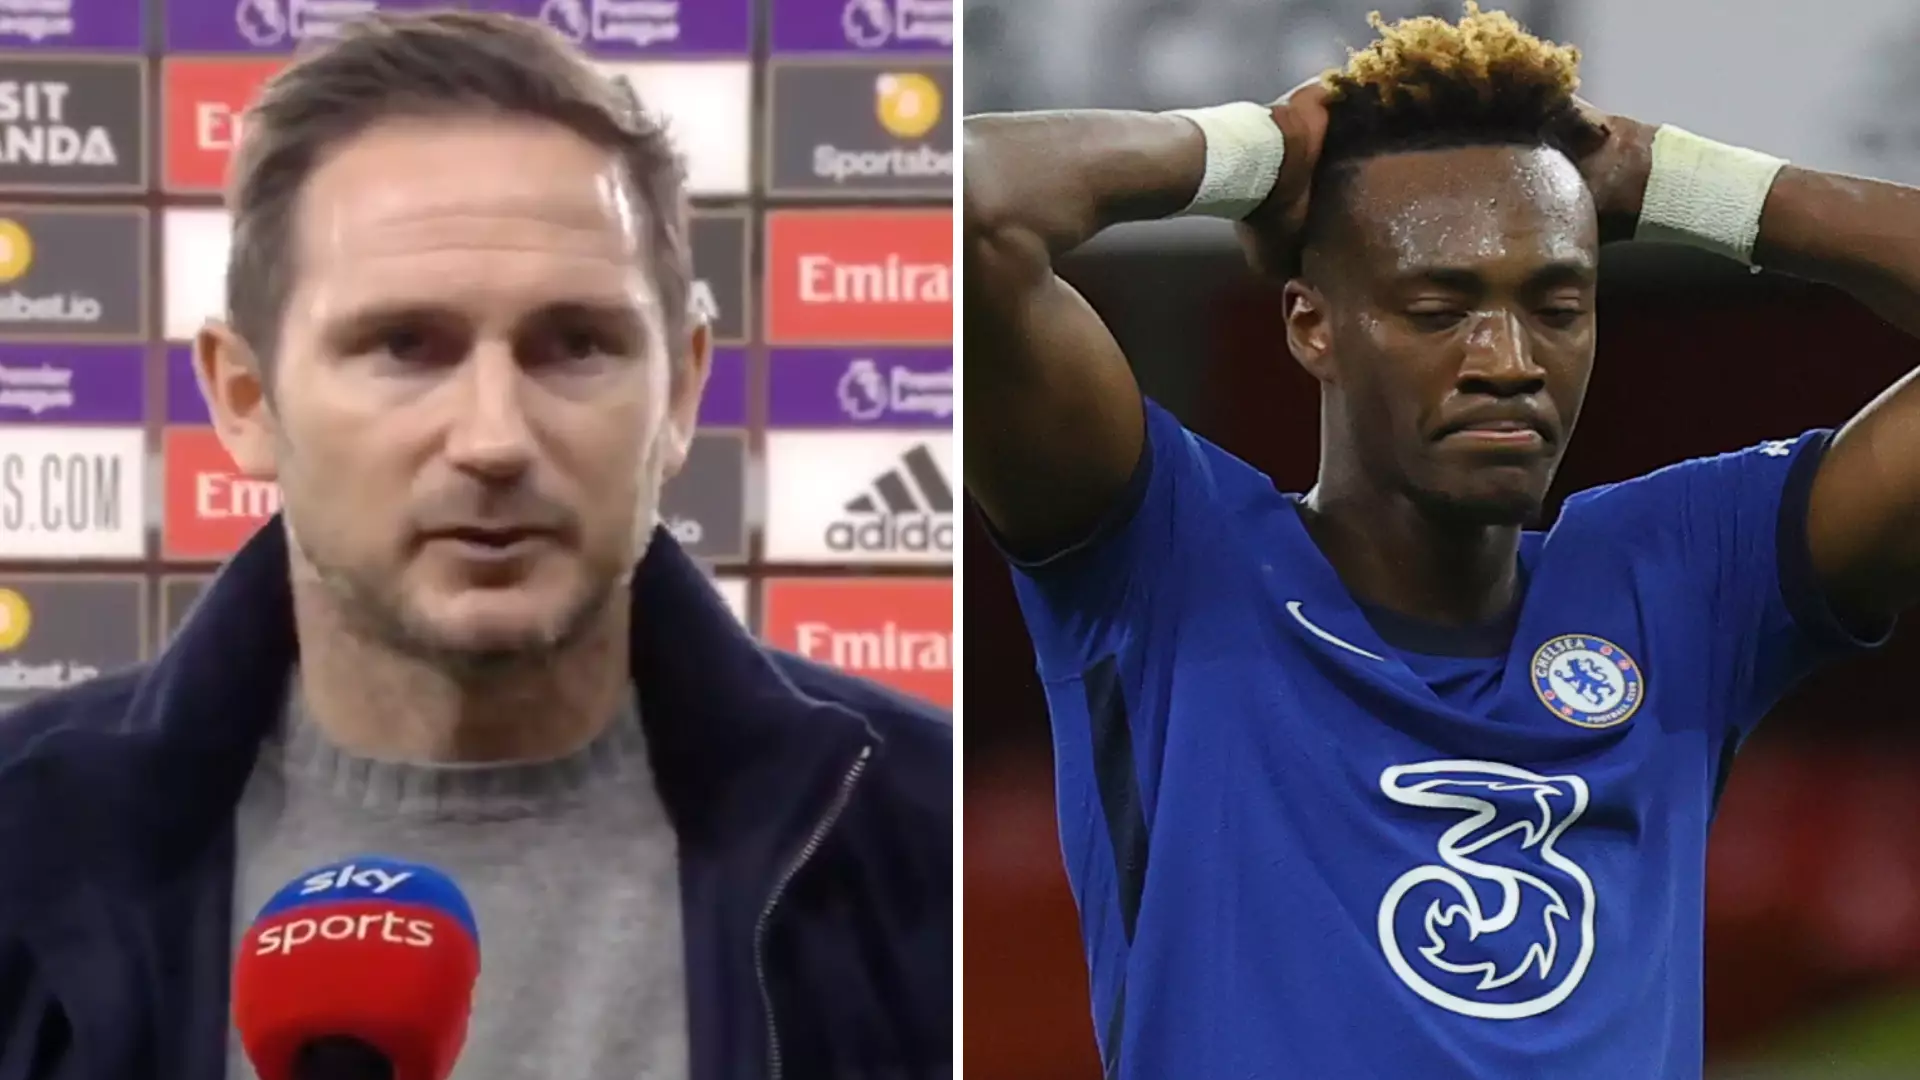 Furious Frank Lampard Blasts 'Lazy' Chelsea Players In Scathing Interview After 3-1 Defeat To Arsenal